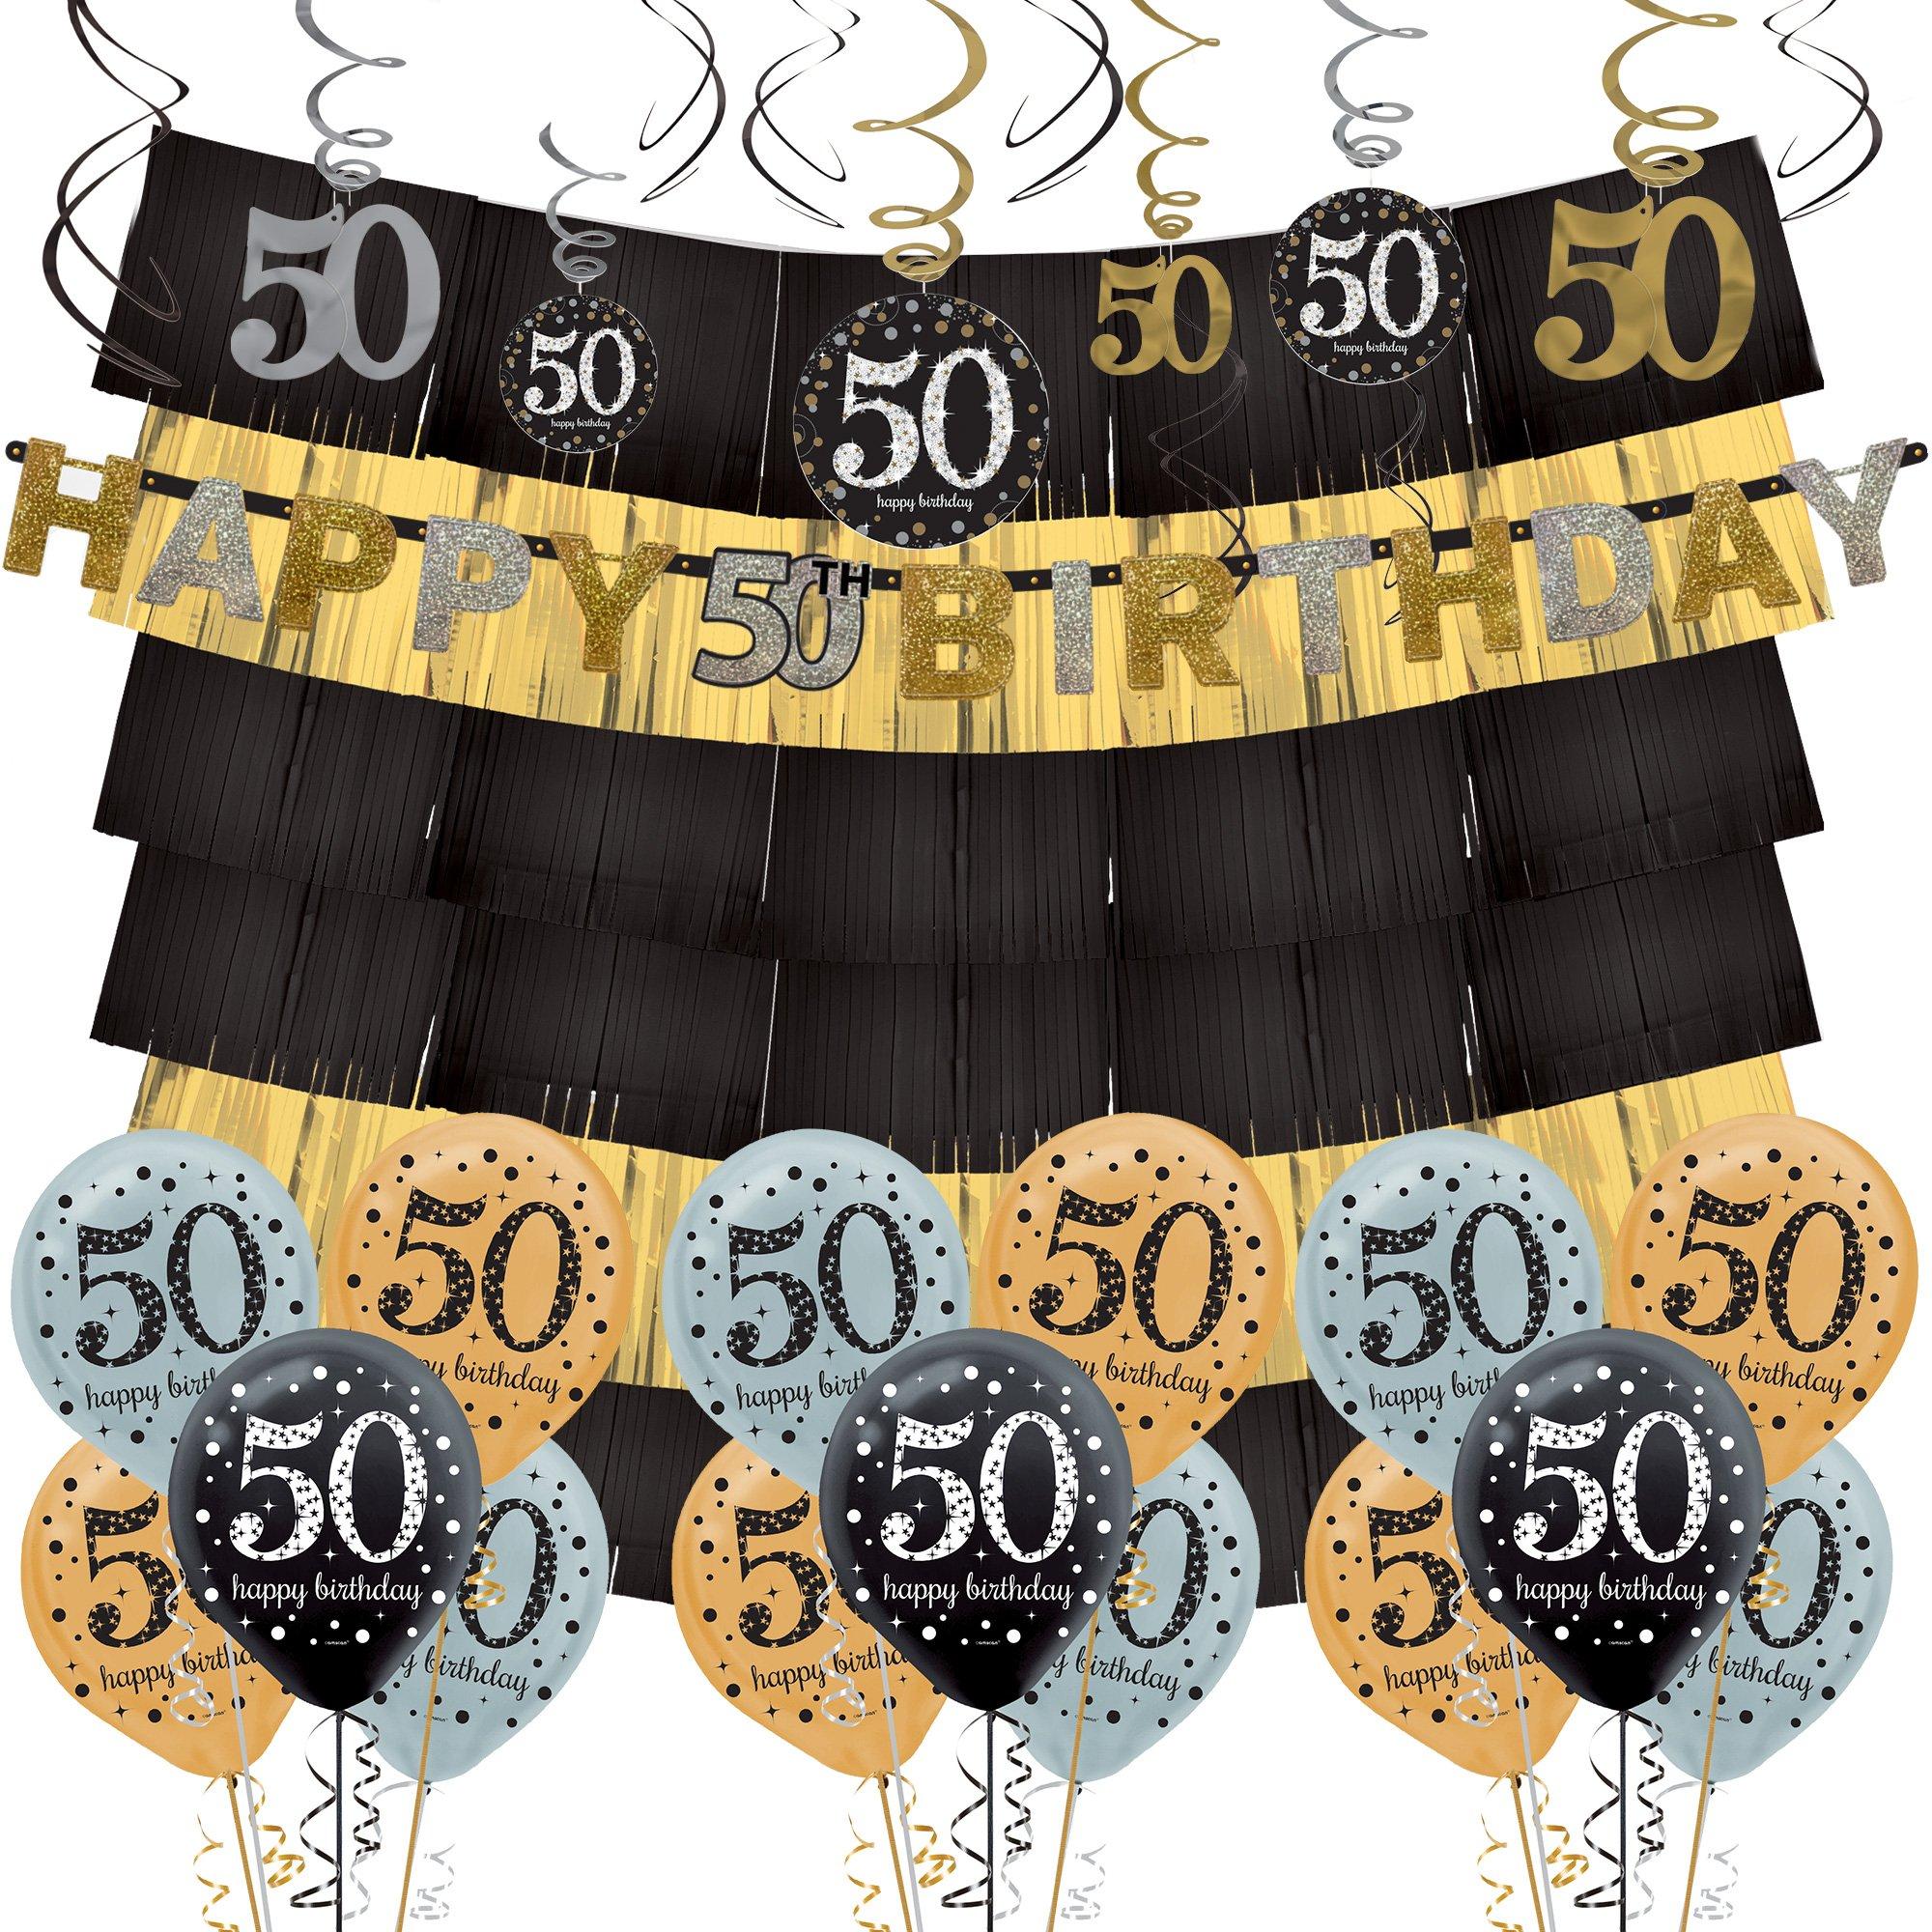 Sparkling Celebration 50th Birthday Decorating Kit Deluxe Party City